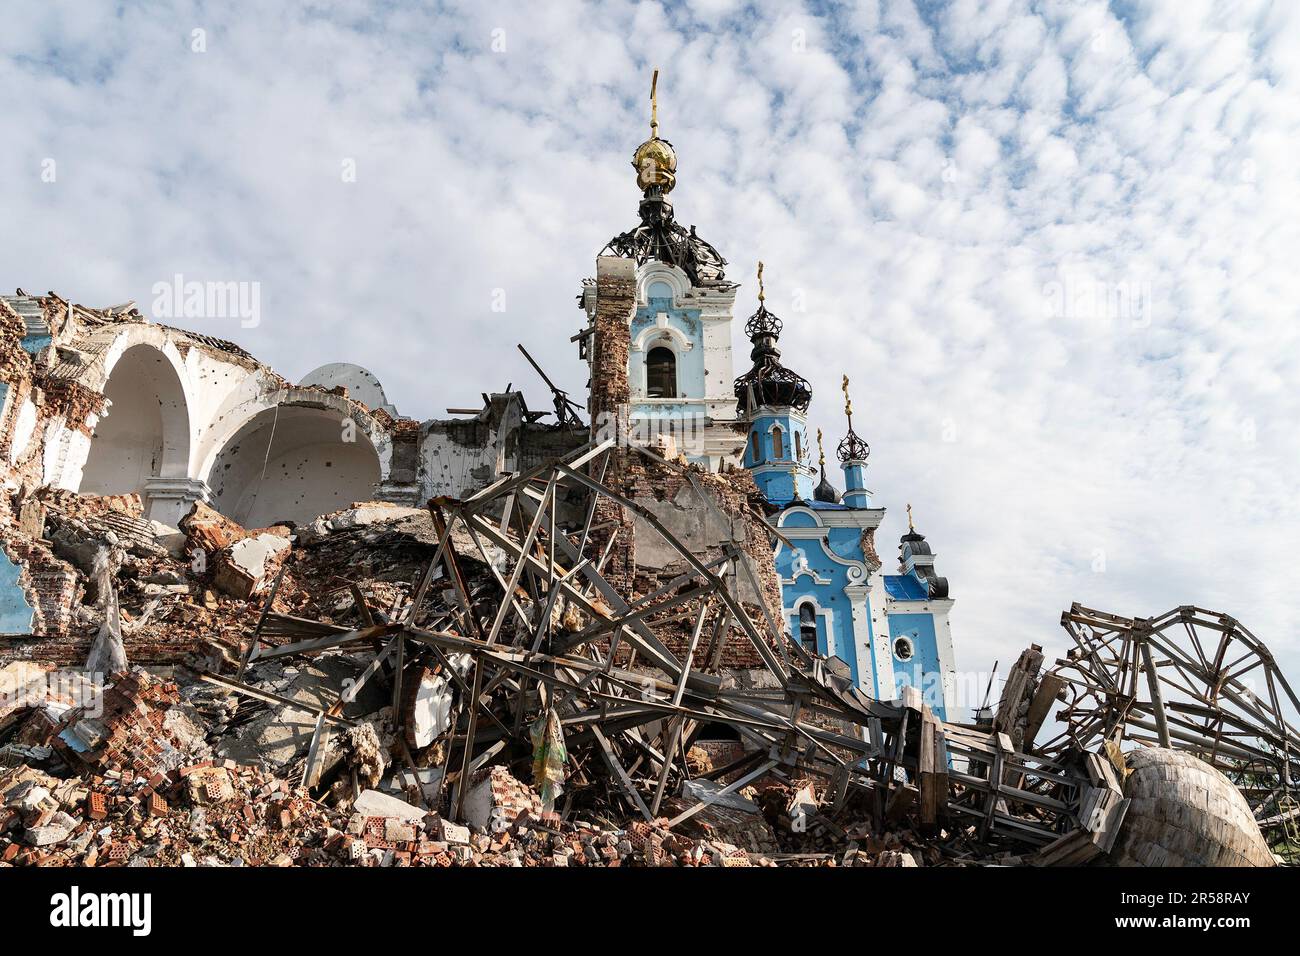 View of destroyed Church of the Holy Mother in village of Bohorodychne in Donetsk region by Russian forces during occupation from August 2022 until September 2022. Russian forces attacked the village in May 2022 and finally occupied the village in August for 2 months, it was liberated in September 2022. From the hills surrounding the village Russian forces shelled and destroyed homes, school and the famous Church of the Holy Mother of God ‘Joy of All Who Sorrow'. The church became a convent of the Sviatohirsk Lavra in 2008. The church belongs to the Ukrainian Orthodox Church (Moscow Patriarcha Stock Photo